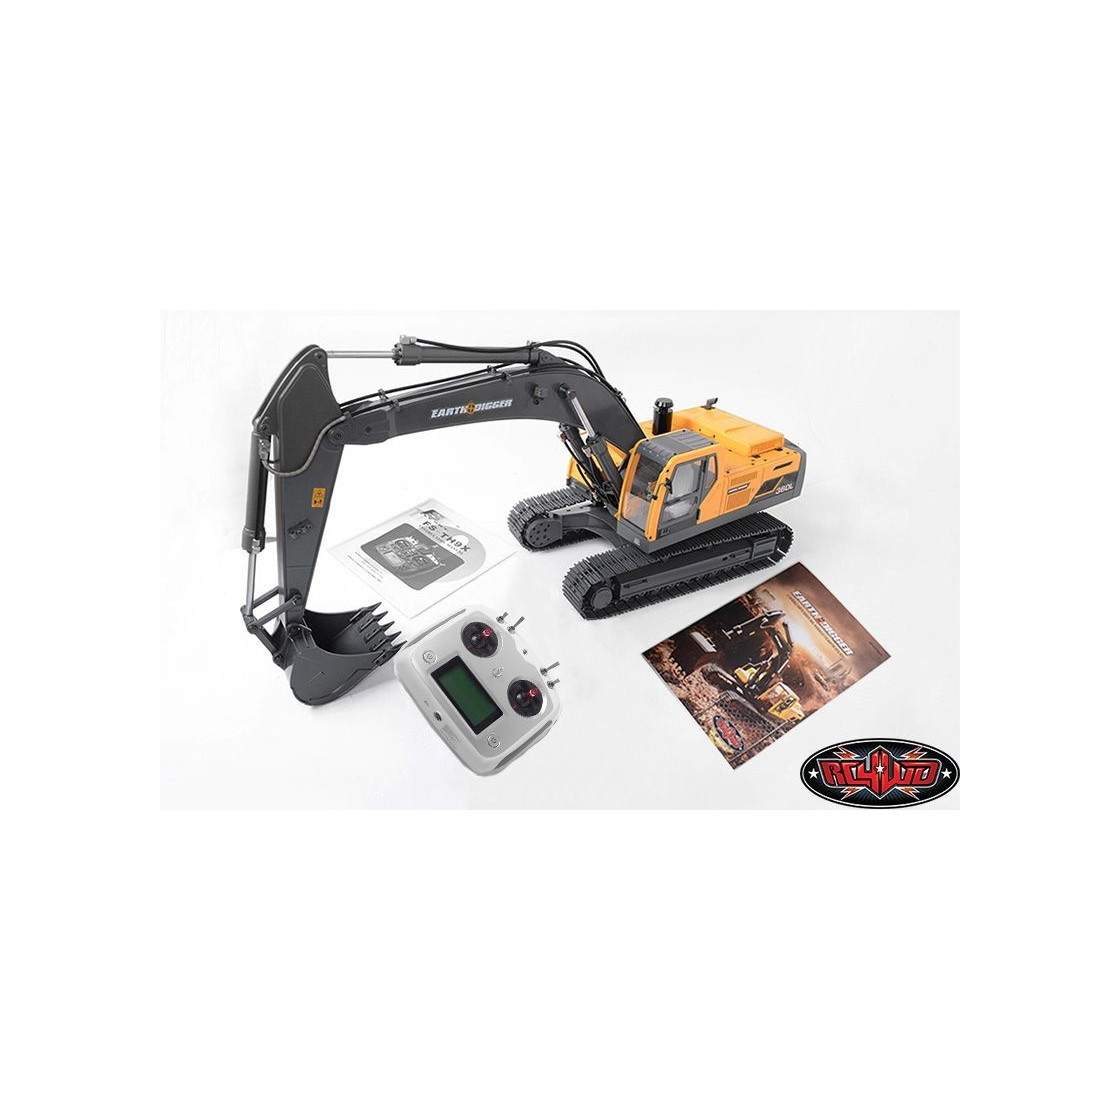 1/14 Scale Earth Digger 360L Hydraulic Excavator (RTR)